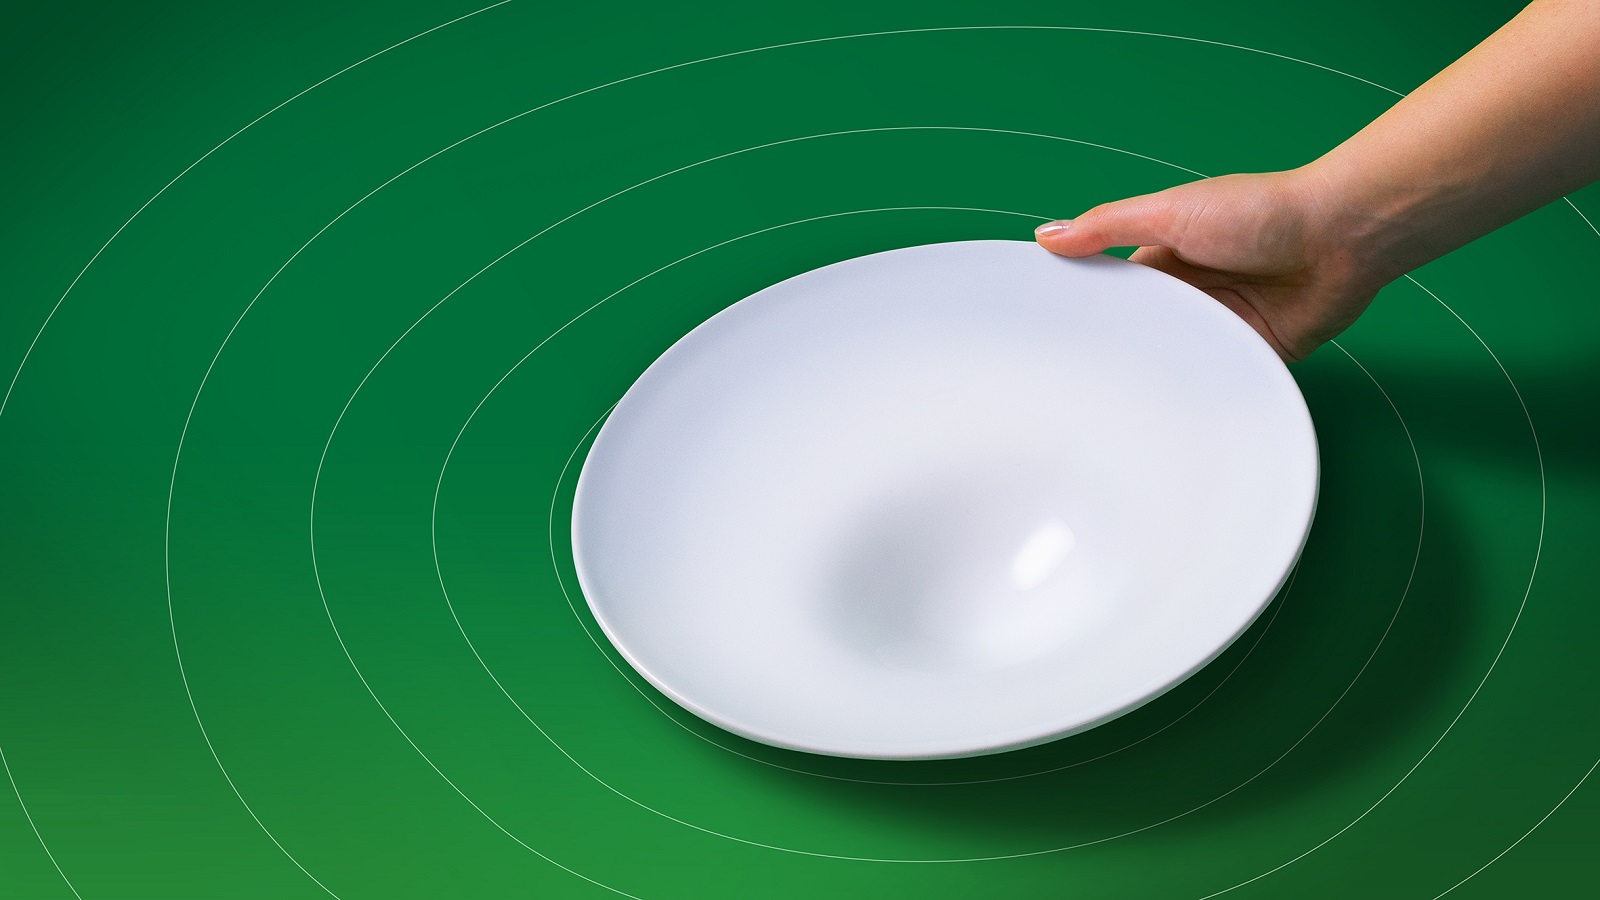 Plate Subconsciously Makes Kids Eat More Veggies